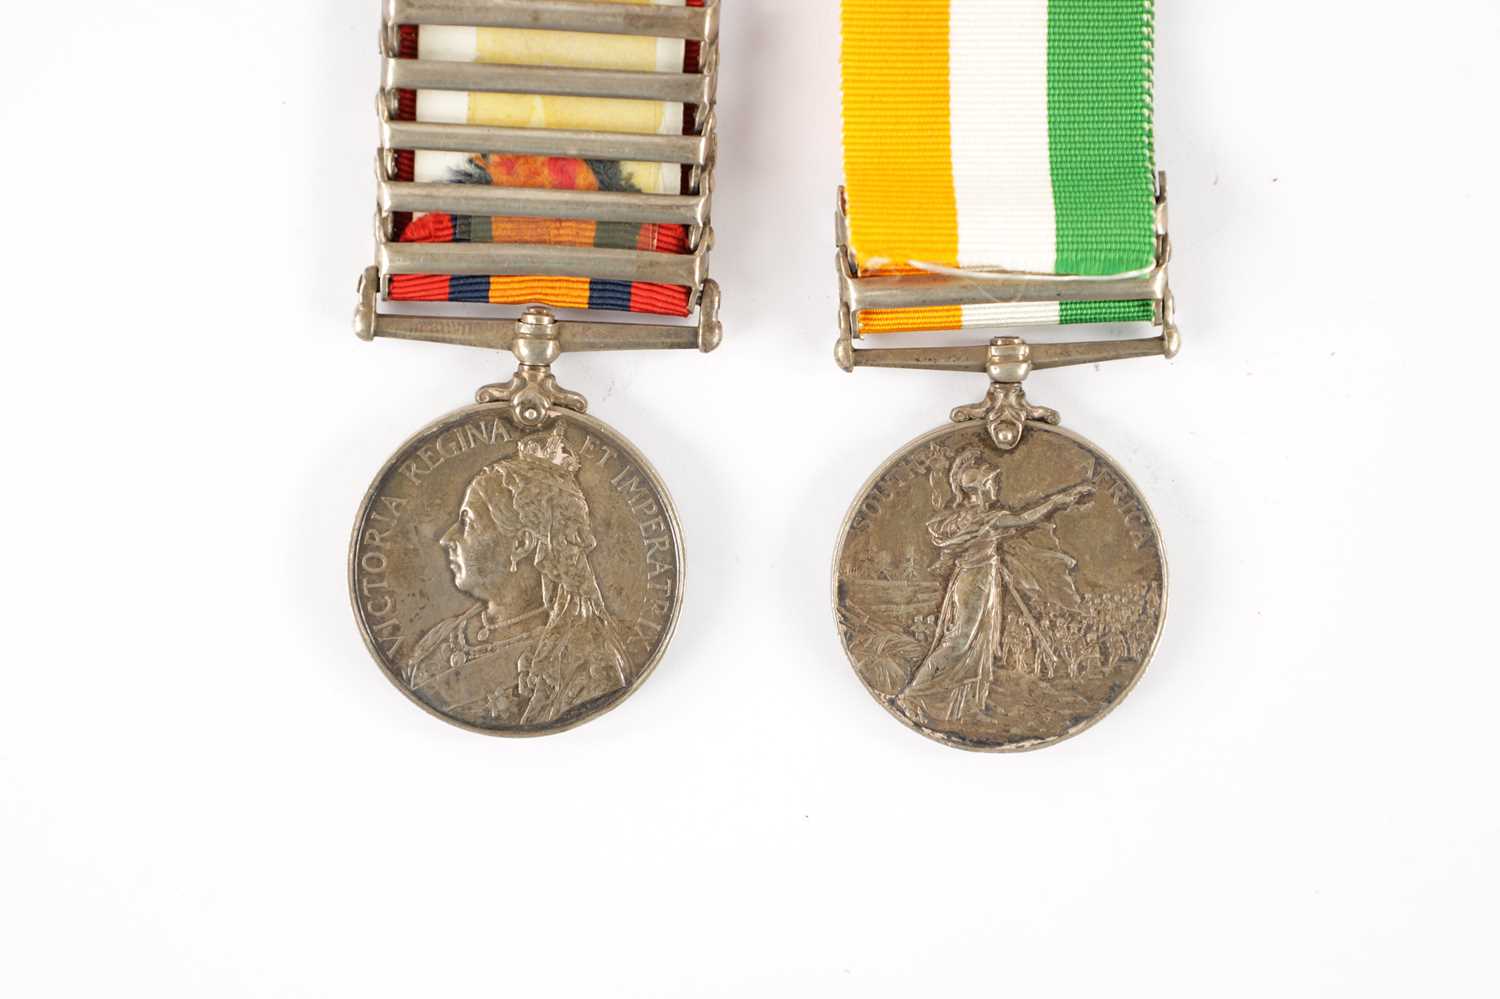 QUEENS SOUTH AFRICA MEDAL 1899-1902 WITH FIVE CLASPS, AND A BOER WAR MEDAL - Image 7 of 7